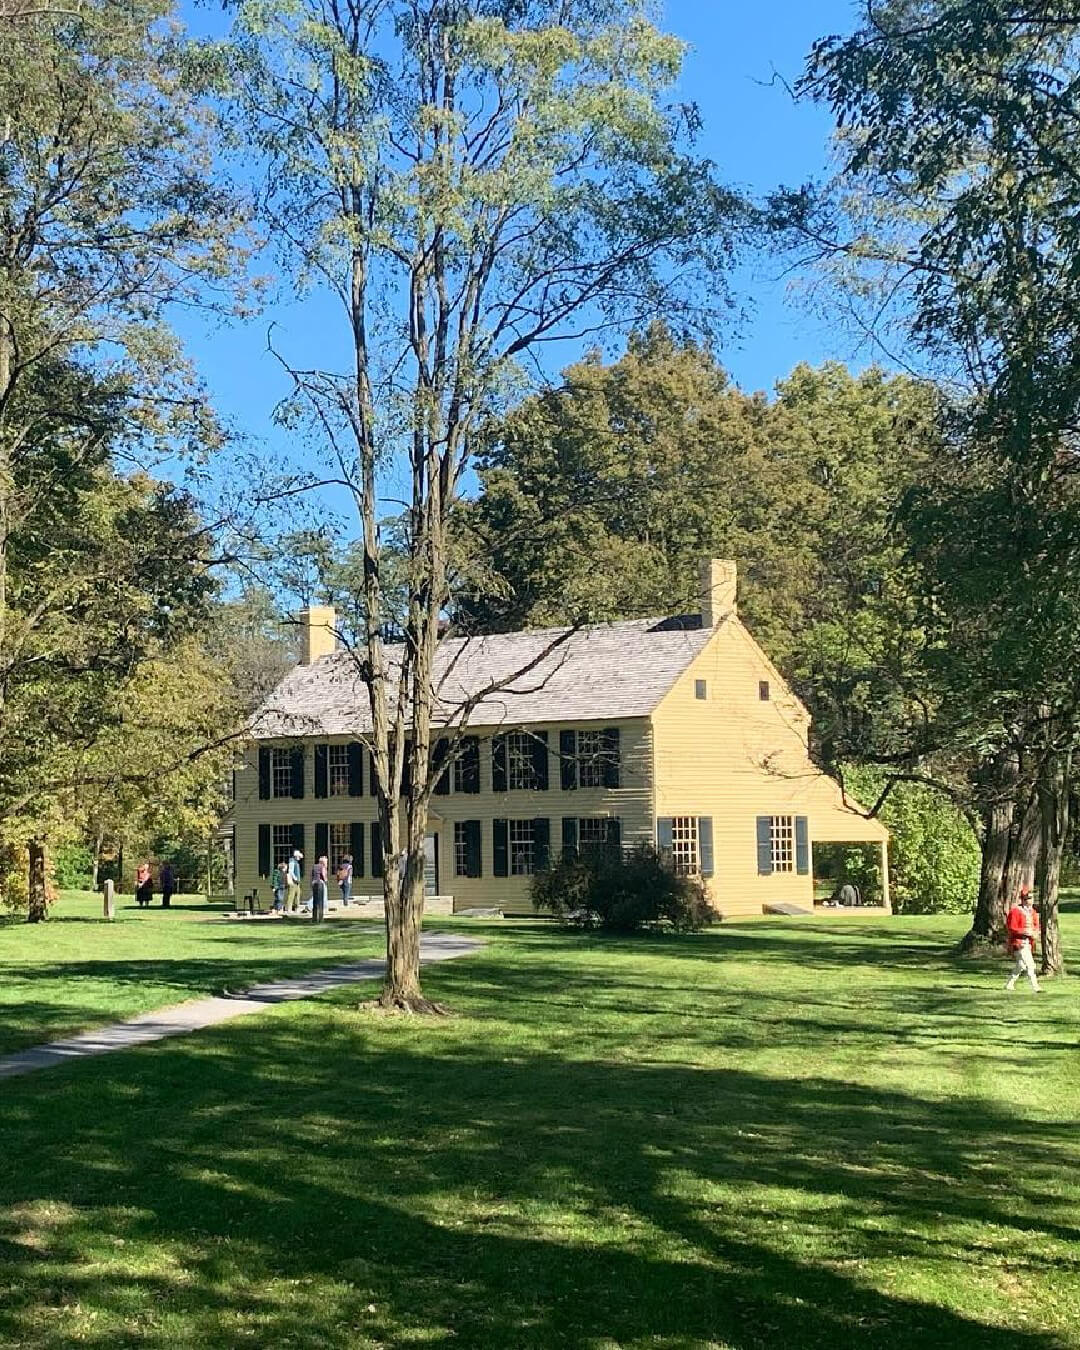 View of the The Schuyler House property from the front